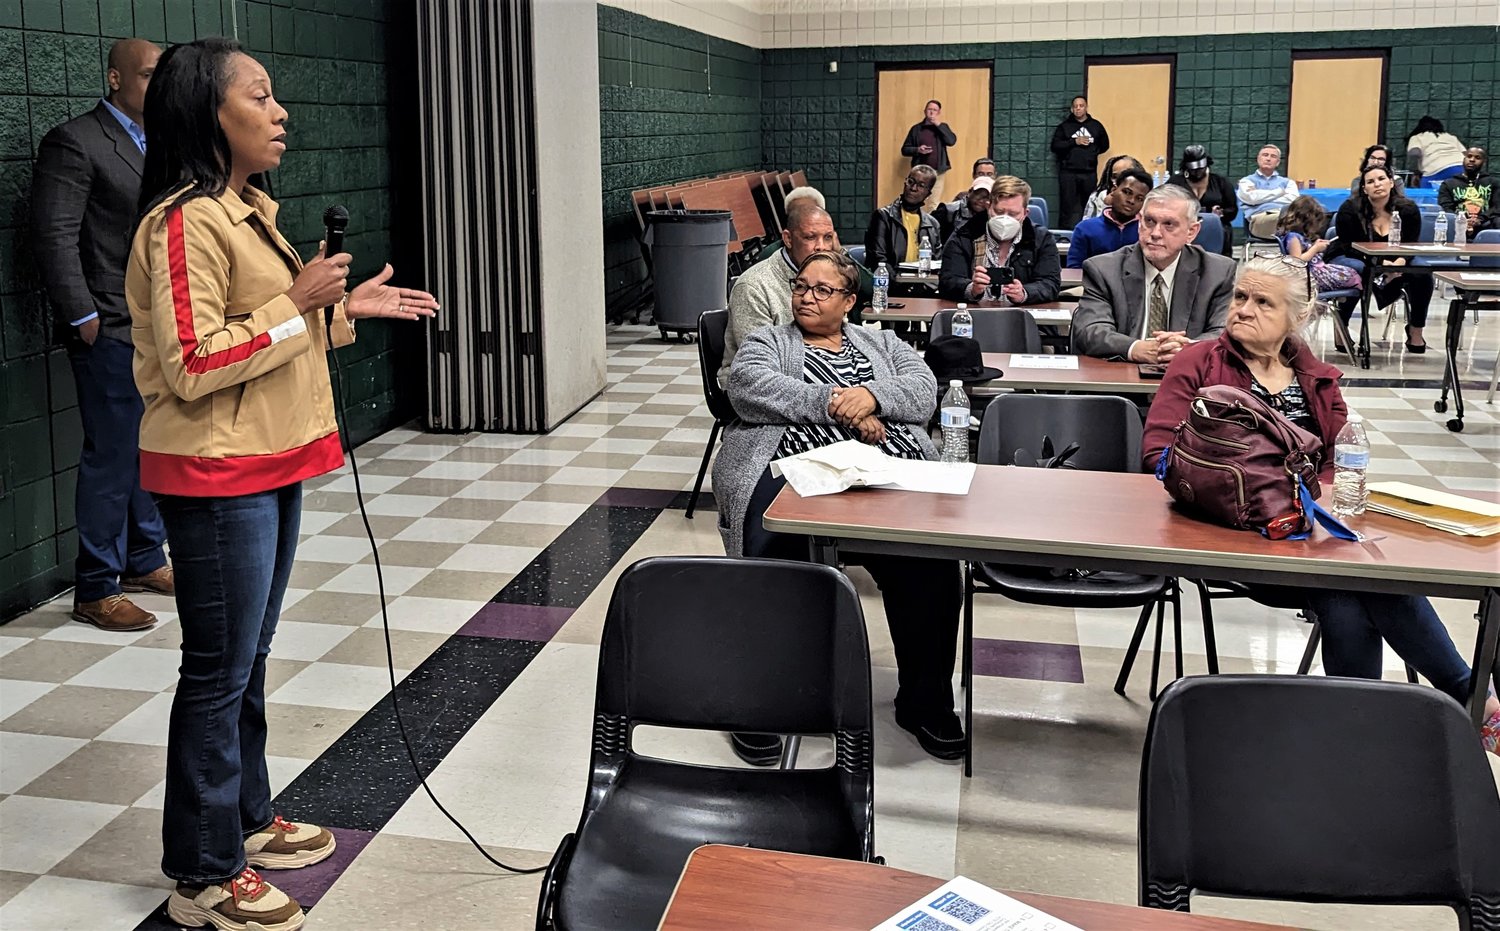 Fayetteville City Council member Courtney Banks-McLaughlin speaks to a crowd at Smith Recreation Center in Fayetteville. The residents were there to learn more about an office of community safety, an entity proposed by community organizers that would respond to mental health calls and hold the Fayetteville Police Department accountable.